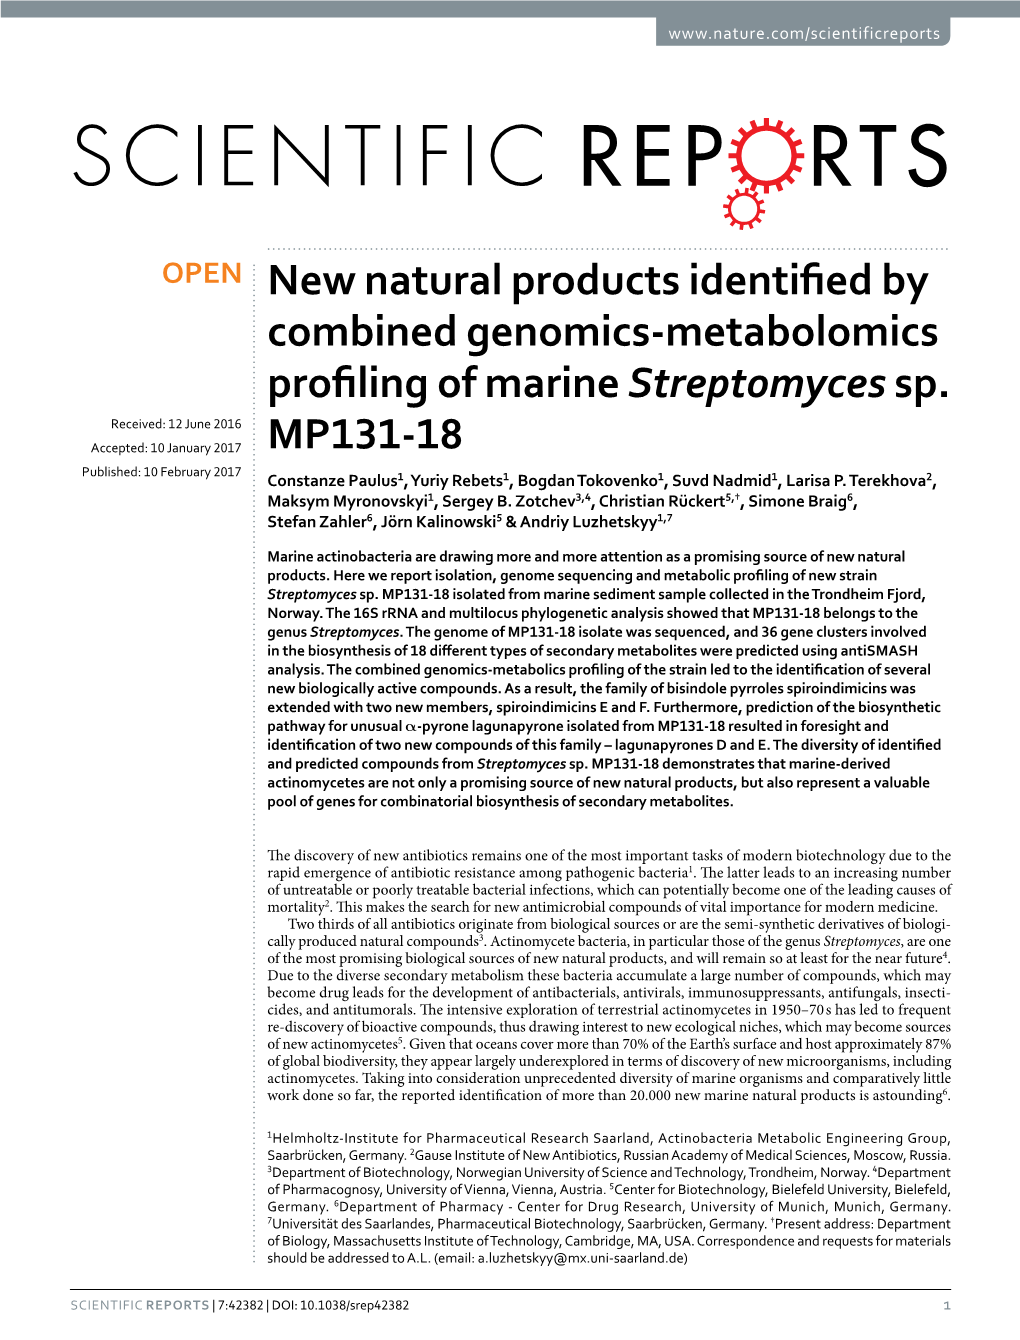 New Natural Products Identified by Combined Genomics-Metabolomics Profiling of Marine Streptomyces Sp. MP131-18